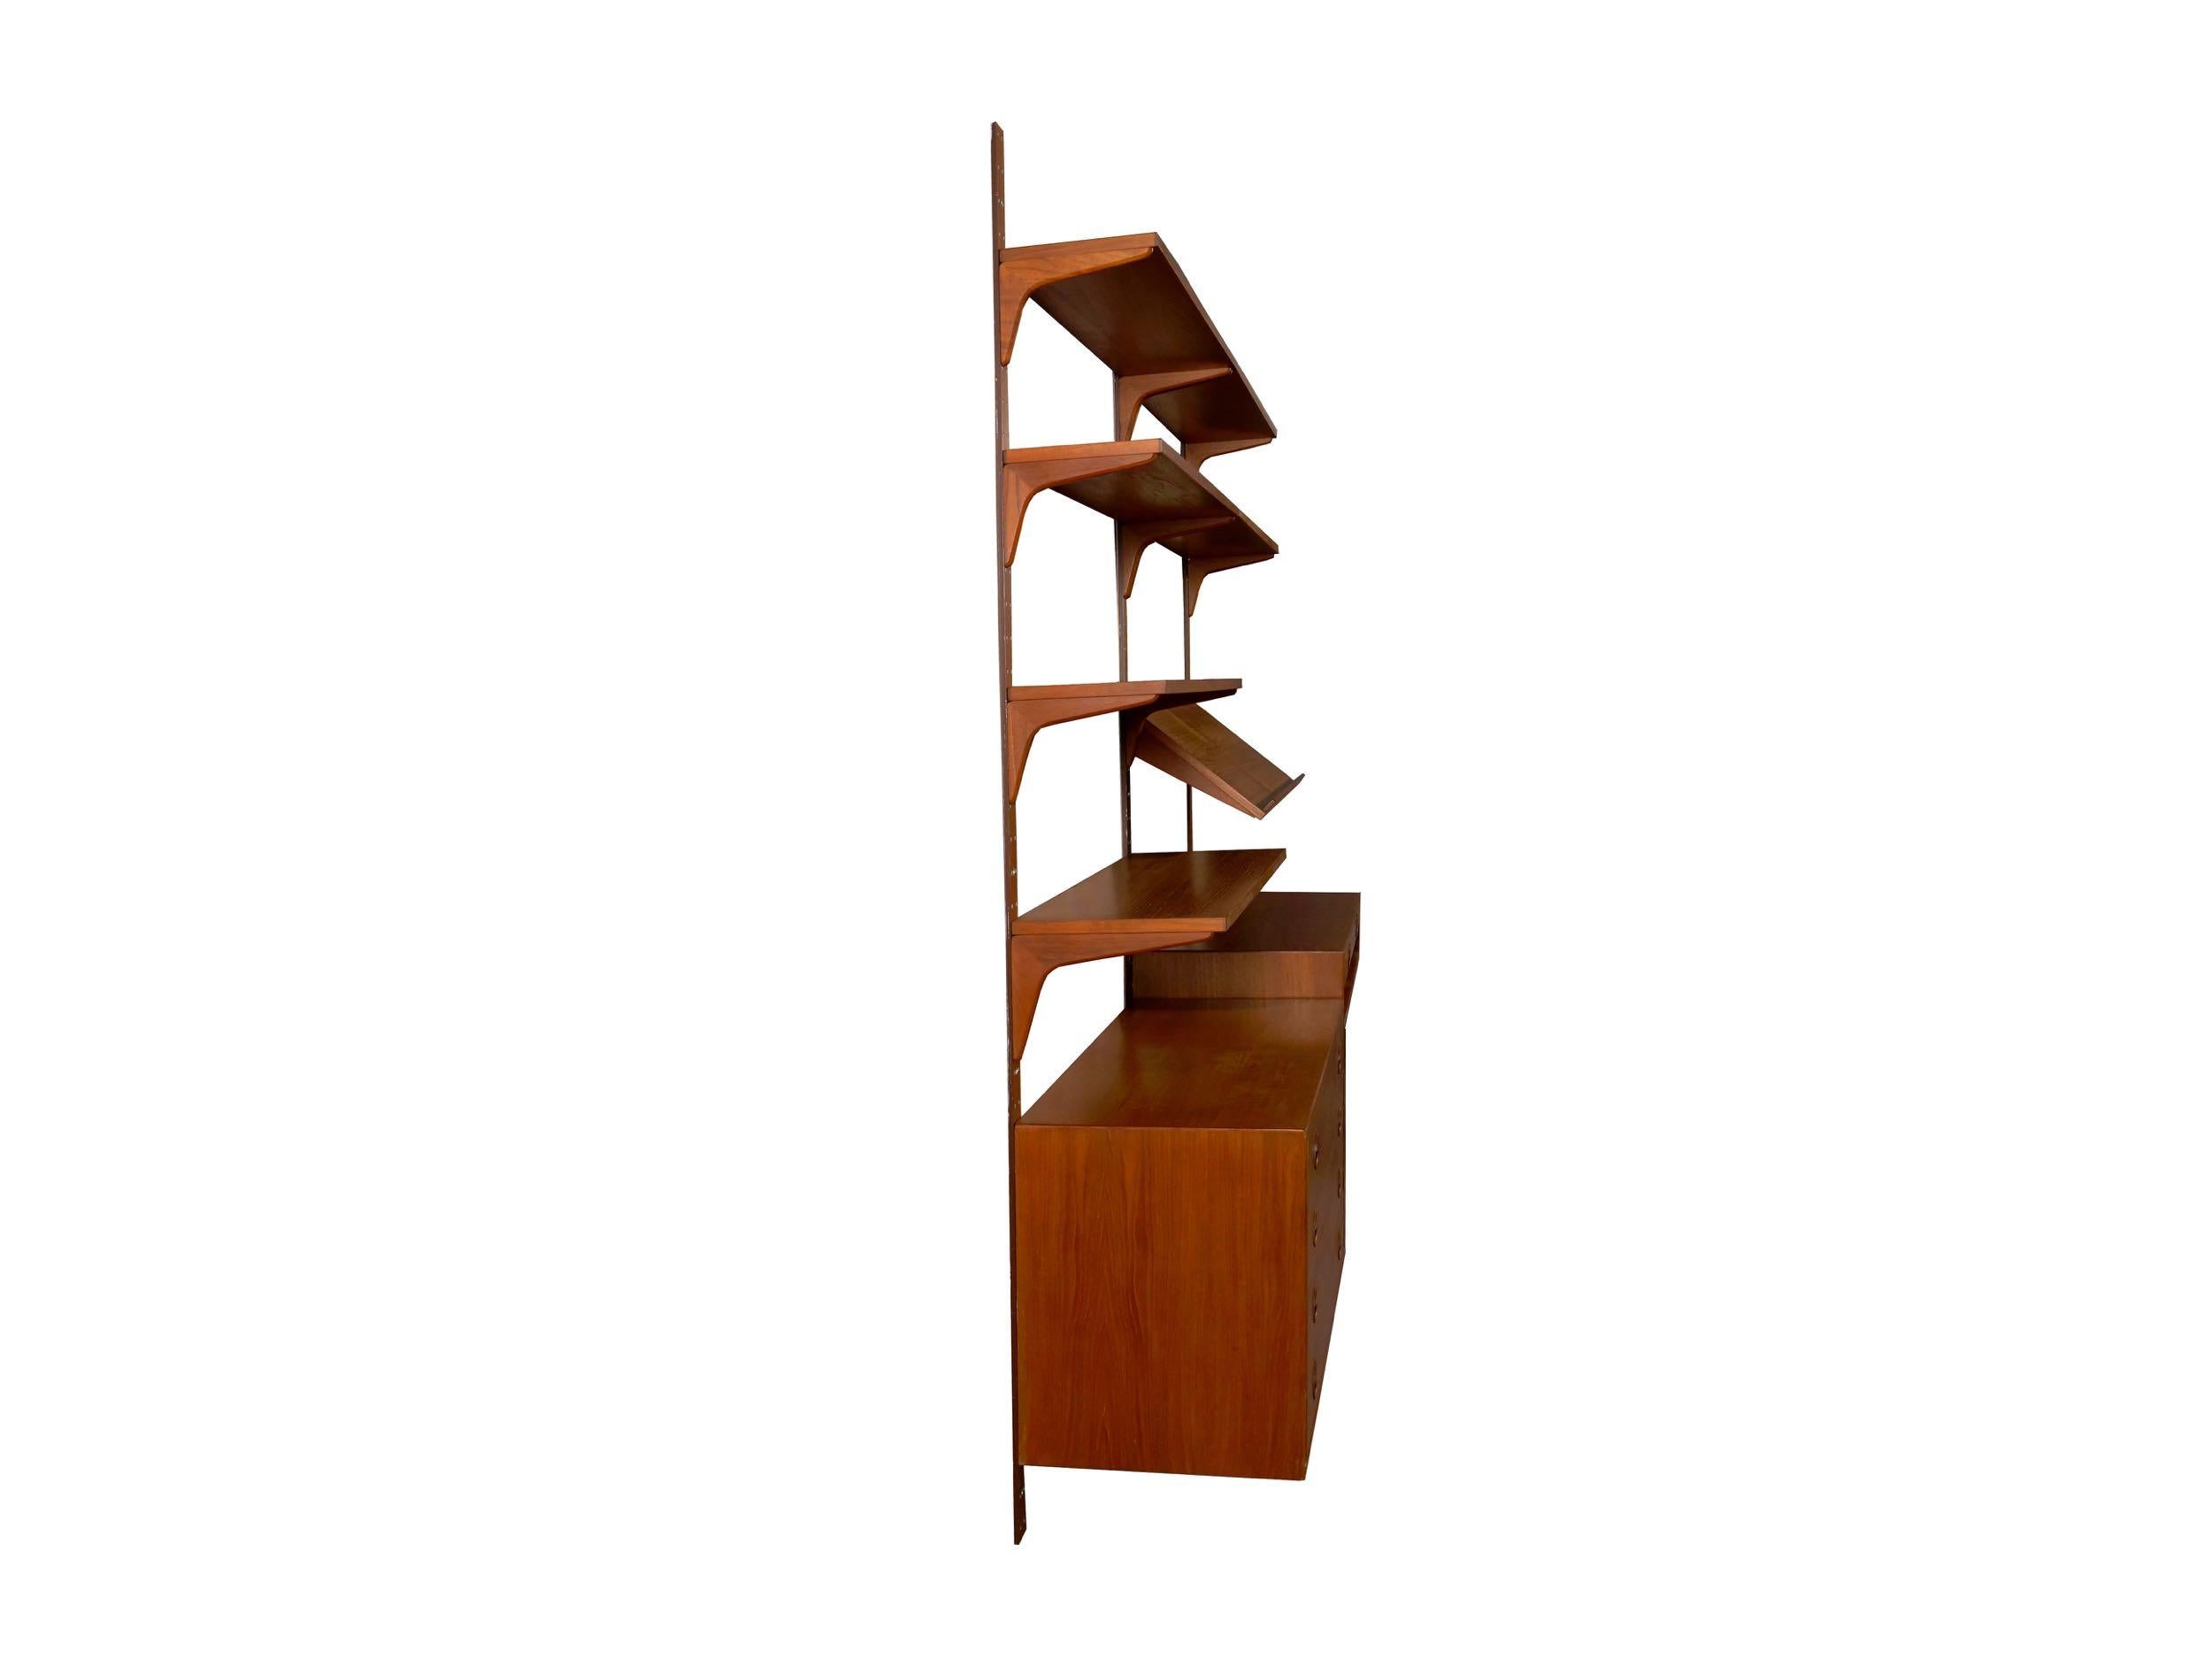 A sleek Mid-Century Modern teak modular wall unit with shelving over a chest of drawers on one side and a desk top on the other, it was designed by Rud Thygesen and Johnny Sorensen for HG Furniture in Denmark. The wall unit is entirely adjustable